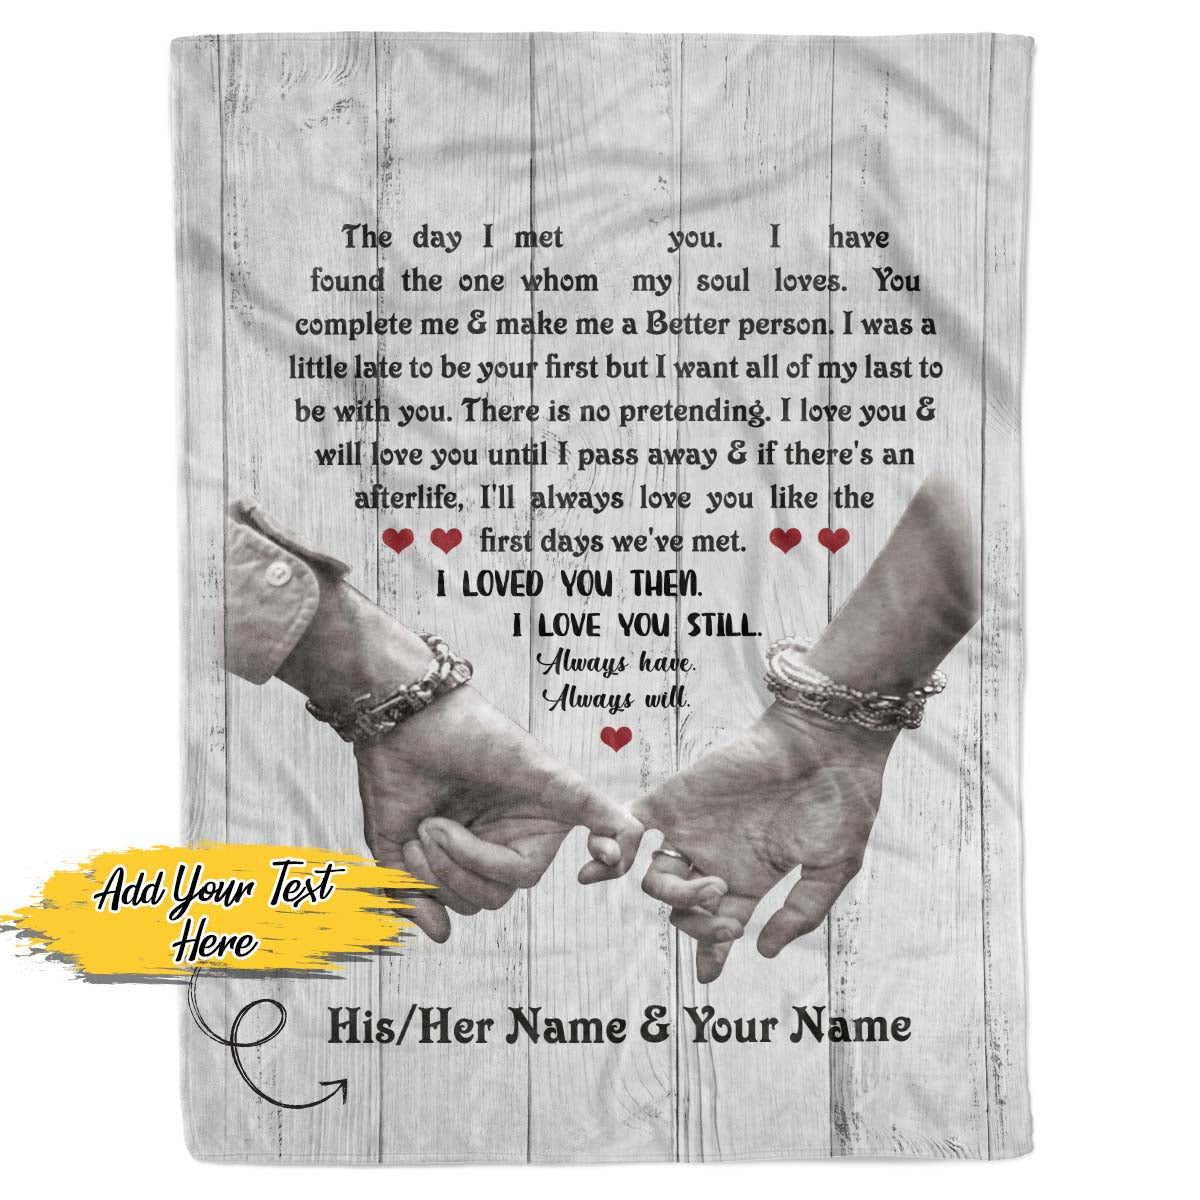 Personalized Custom Blanket The Day I Met You Fleece Blanket Gift For Couple Man Woman Wife Husband Valentine day